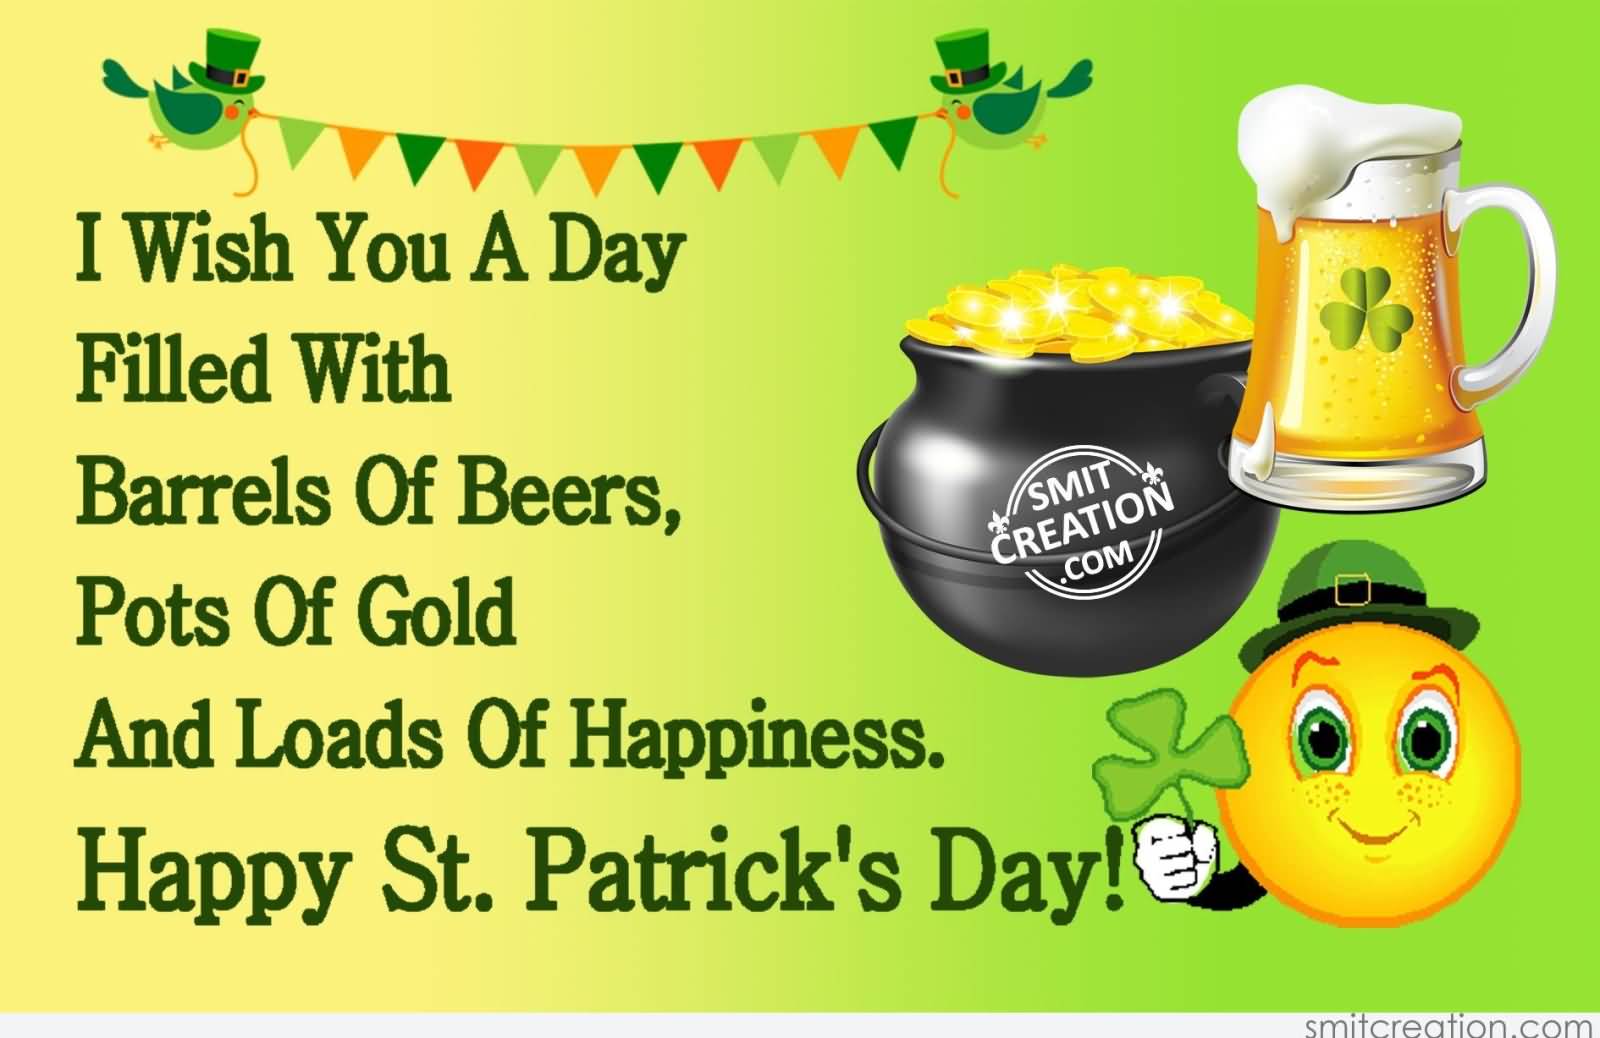 I Wish A Day Filled With Barrels Of Beers, Pots Of Gold And Loads Of Happiness Happy Saint Patrick’s Day